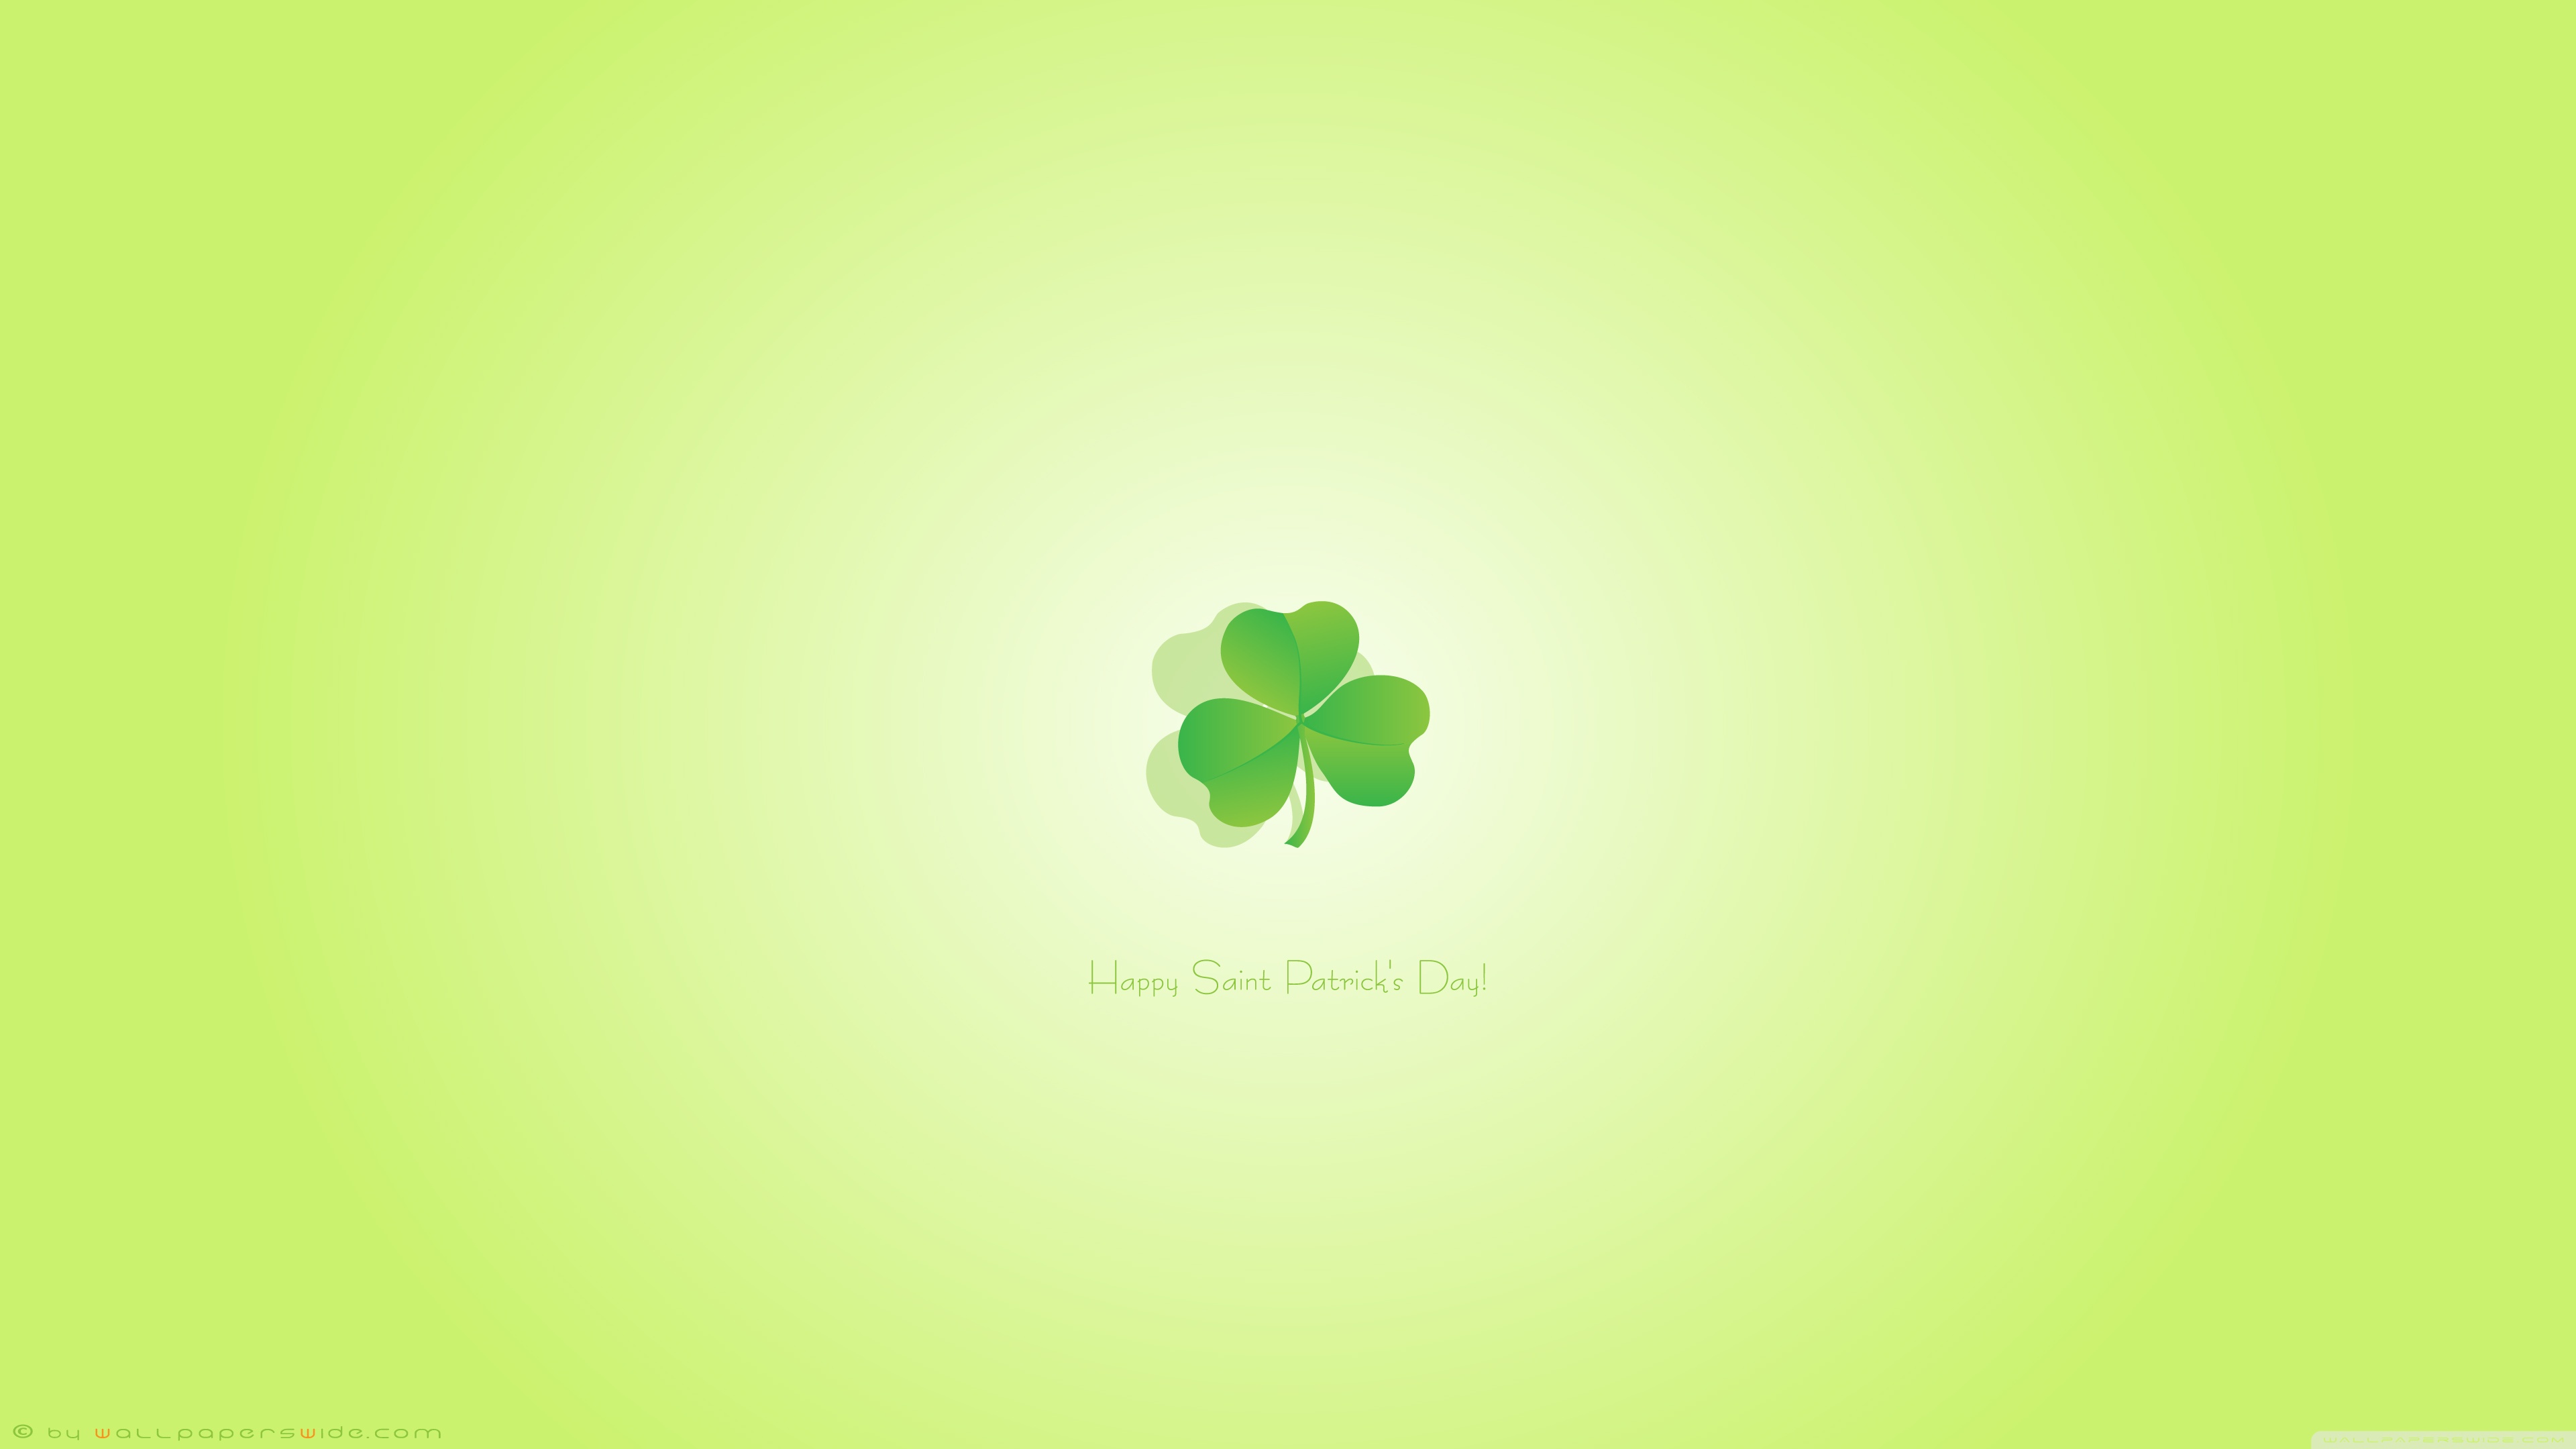 Happy Saint Patrick's Day Ultra HD Desktop Background Wallpaper for : Multi  Display, Dual Monitor : Tablet : Smartphone